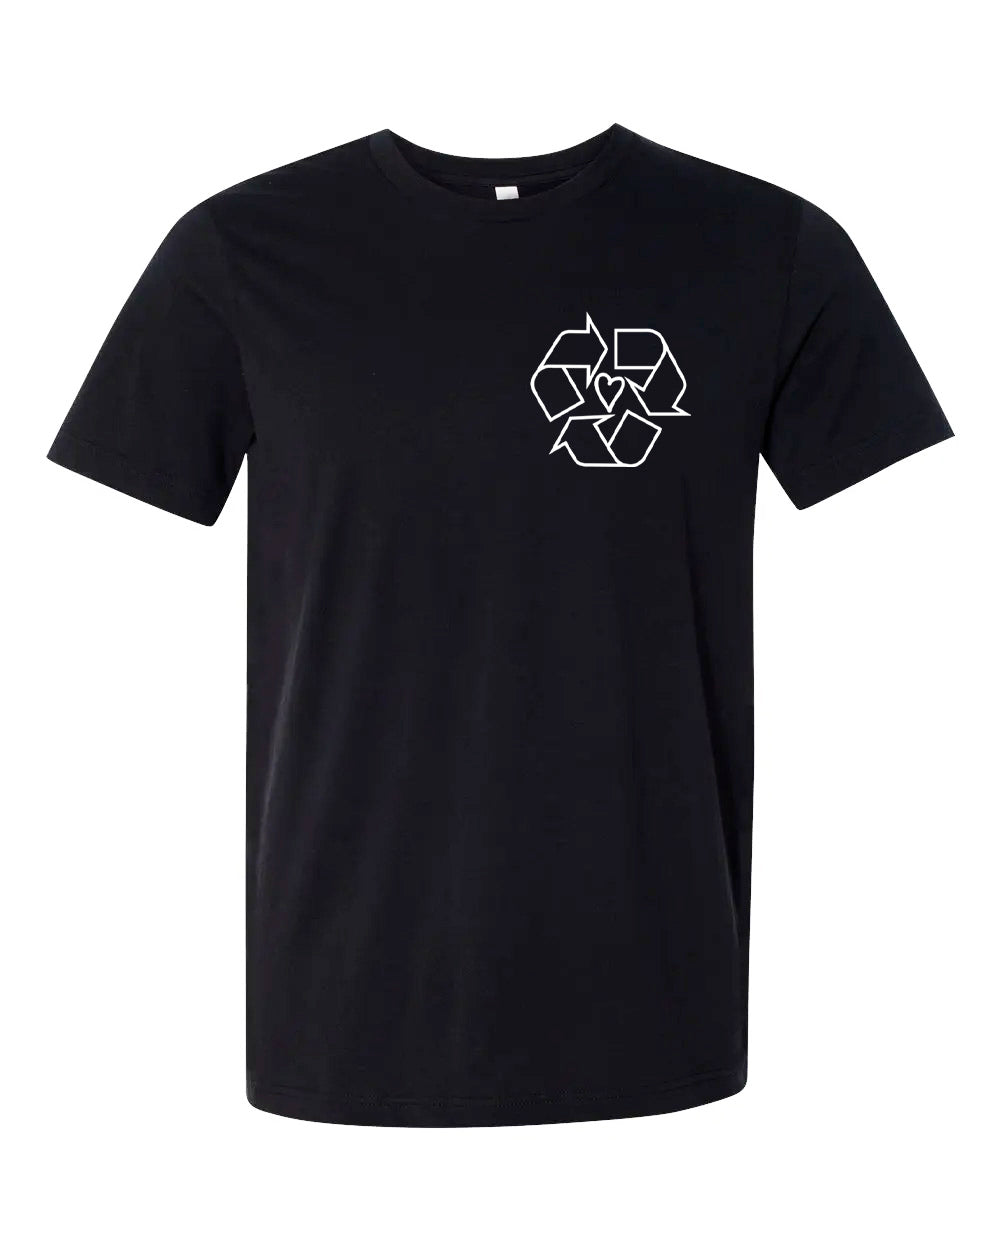 REUSE REDUCE CREST T-Shirts | Unsettled Apparel